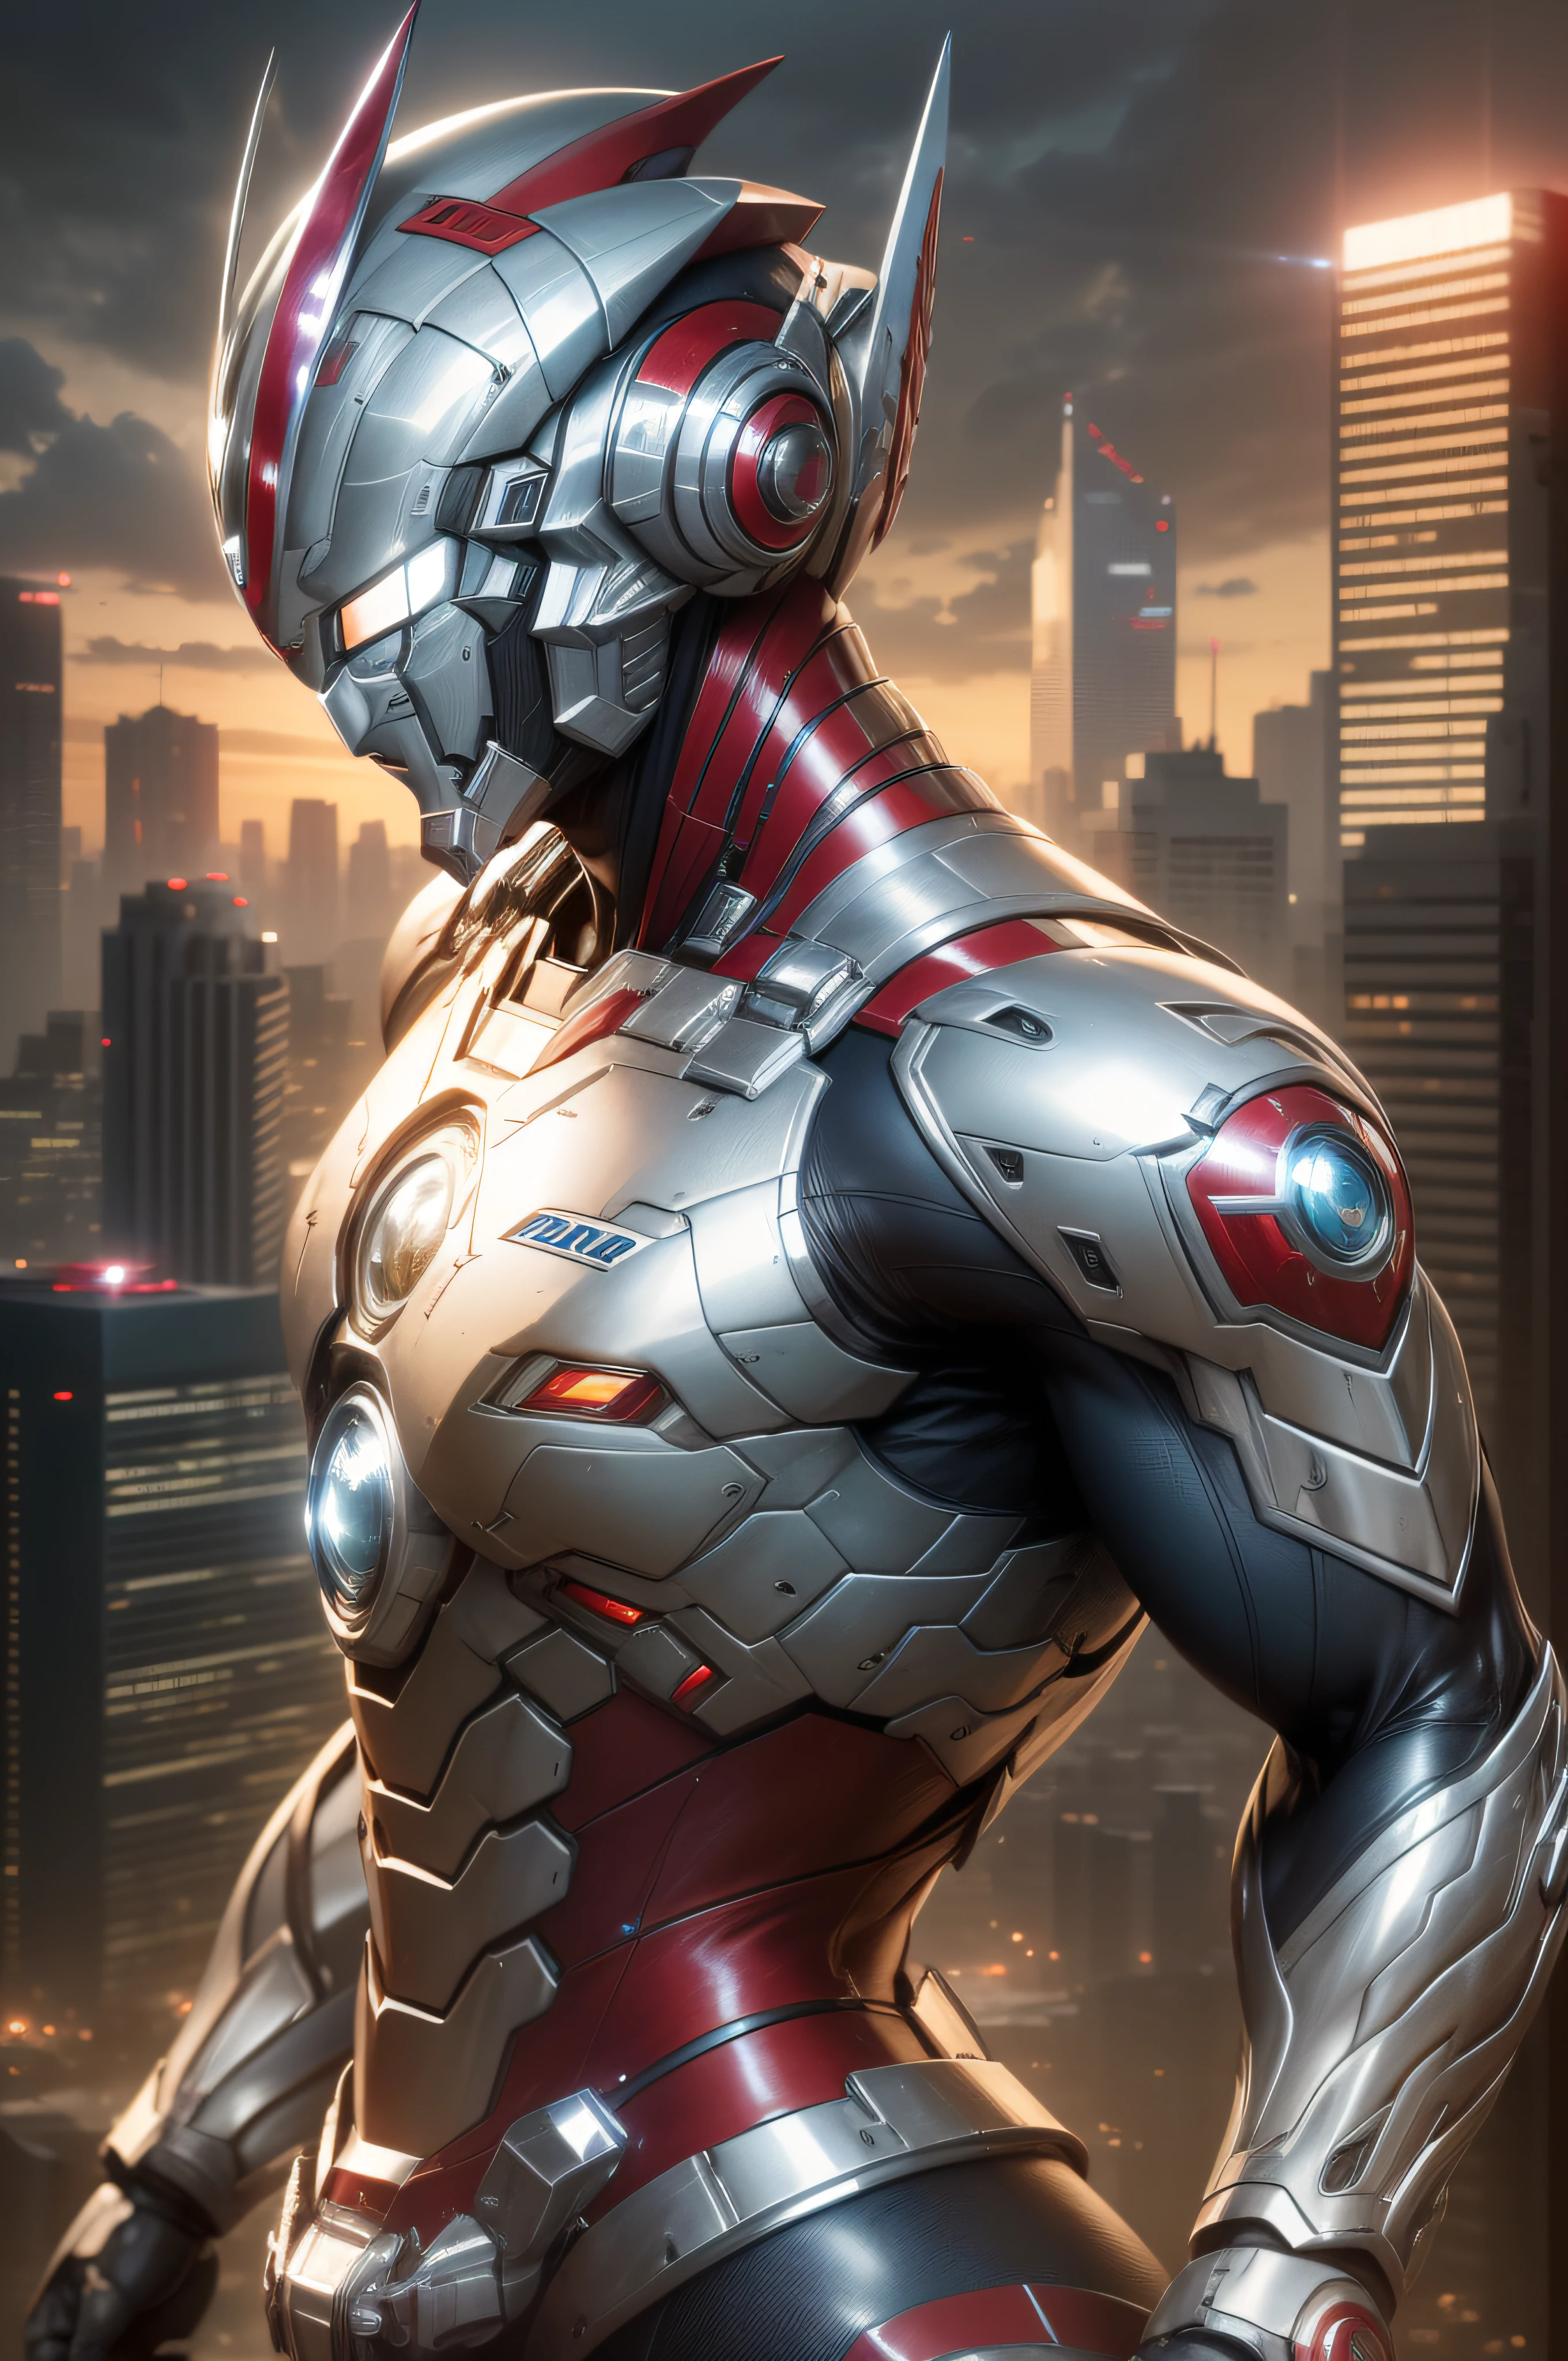 (Masterpiece, Superb Quality, Super Delicate, High Resolution), Male Focus, (((Mobile Ultraman))), (No Muscles))), (His head is tapered, his body is made of red and silver (((chrome))), his arms are streamlined, he has a round calculator on his chest, he looks tall and athletic, the overall look is streamlined and modern), (standing pose), pose for photos, high angle, dark night, city ruins, background details, ((((whole body))), from above, solo, photo-realistic, octane render, unreal engine, ultra-realistic ((( Huge feeling)))